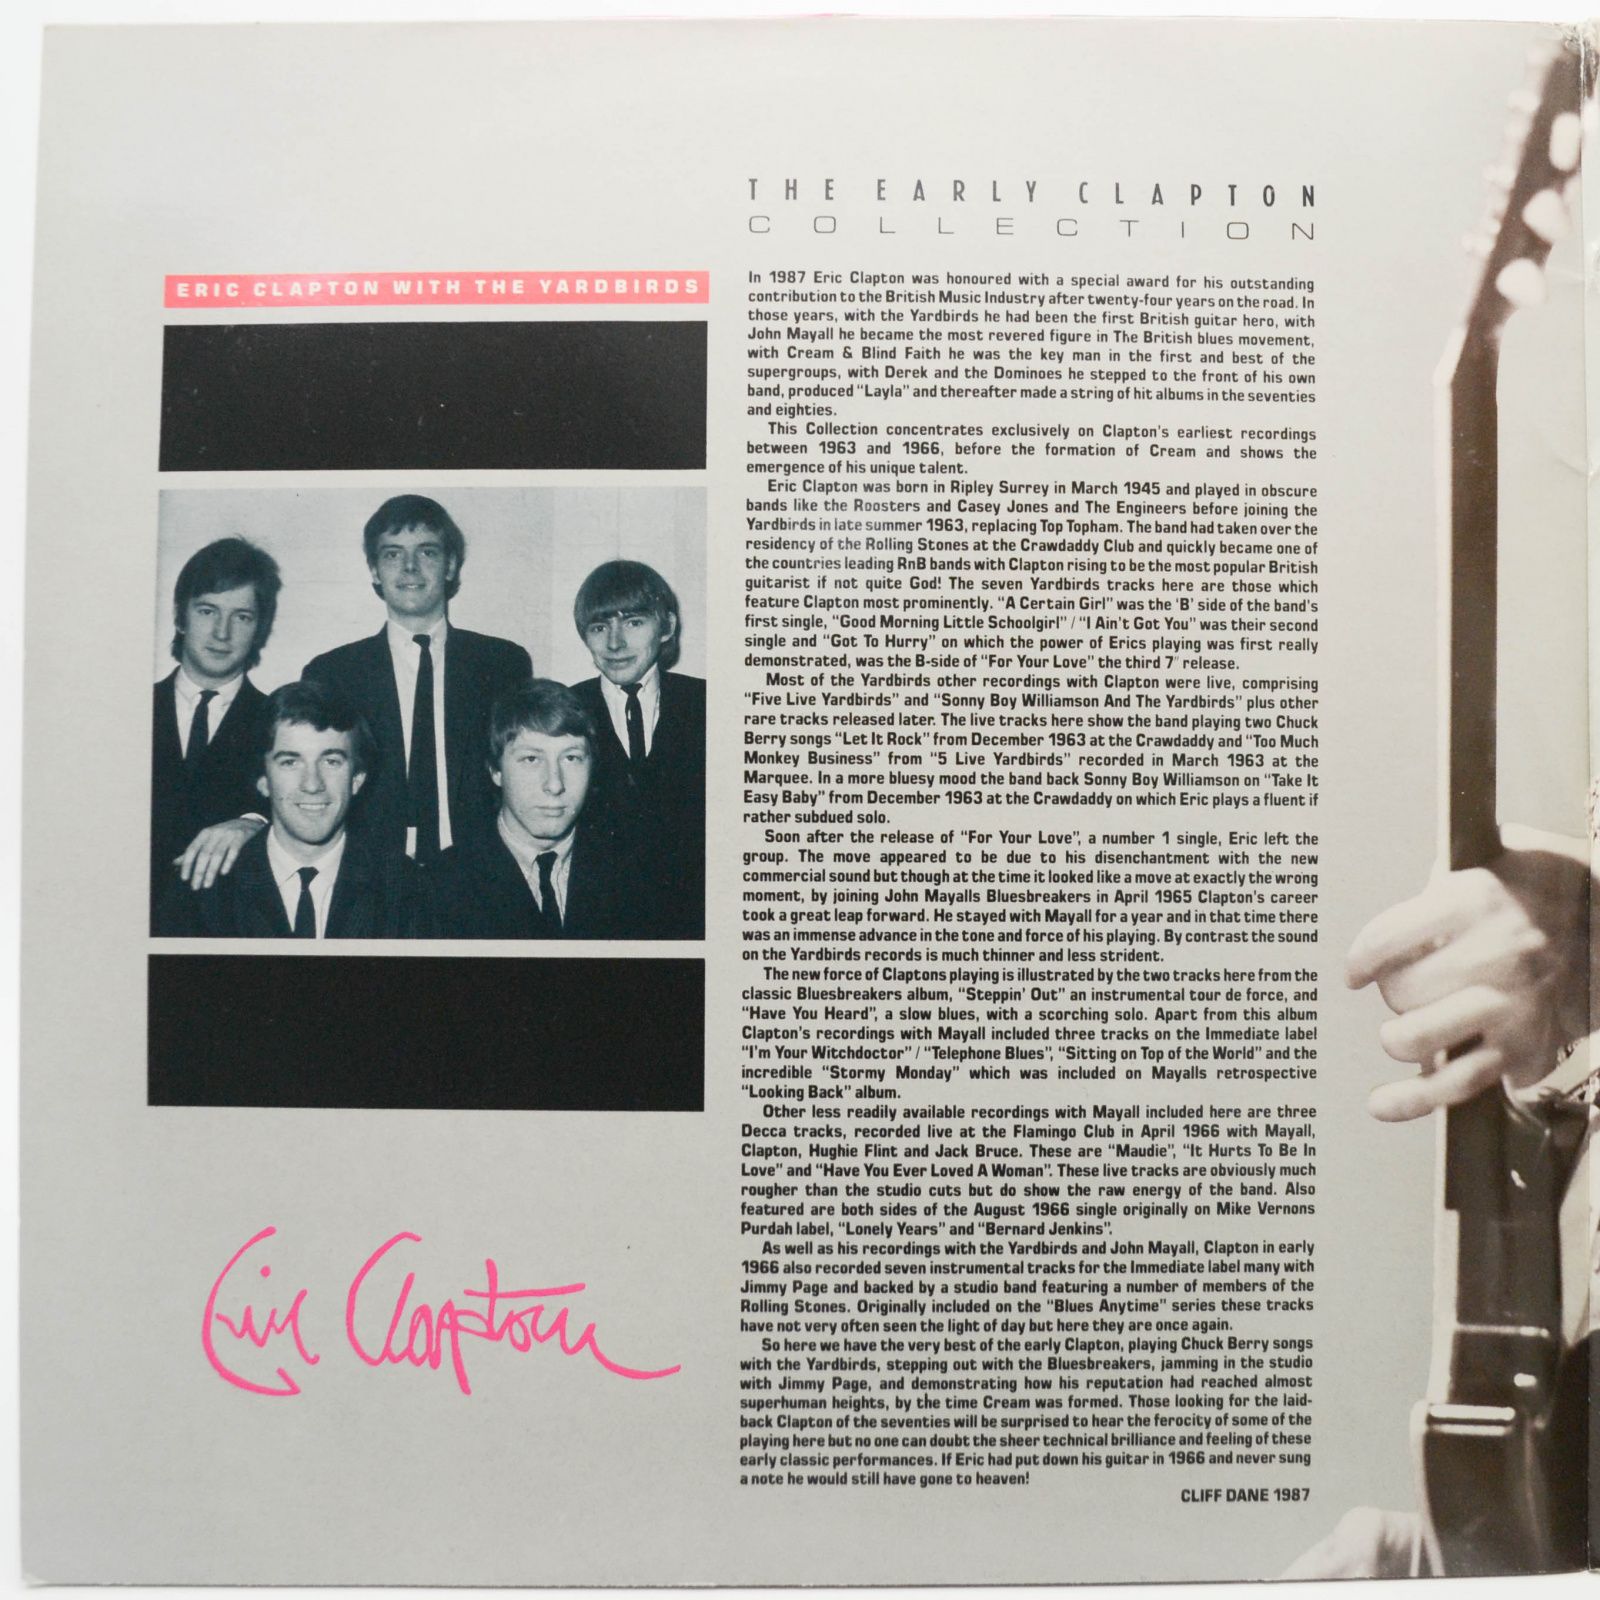 Eric Clapton — The Early Clapton Collection (2LP, UK), 1987